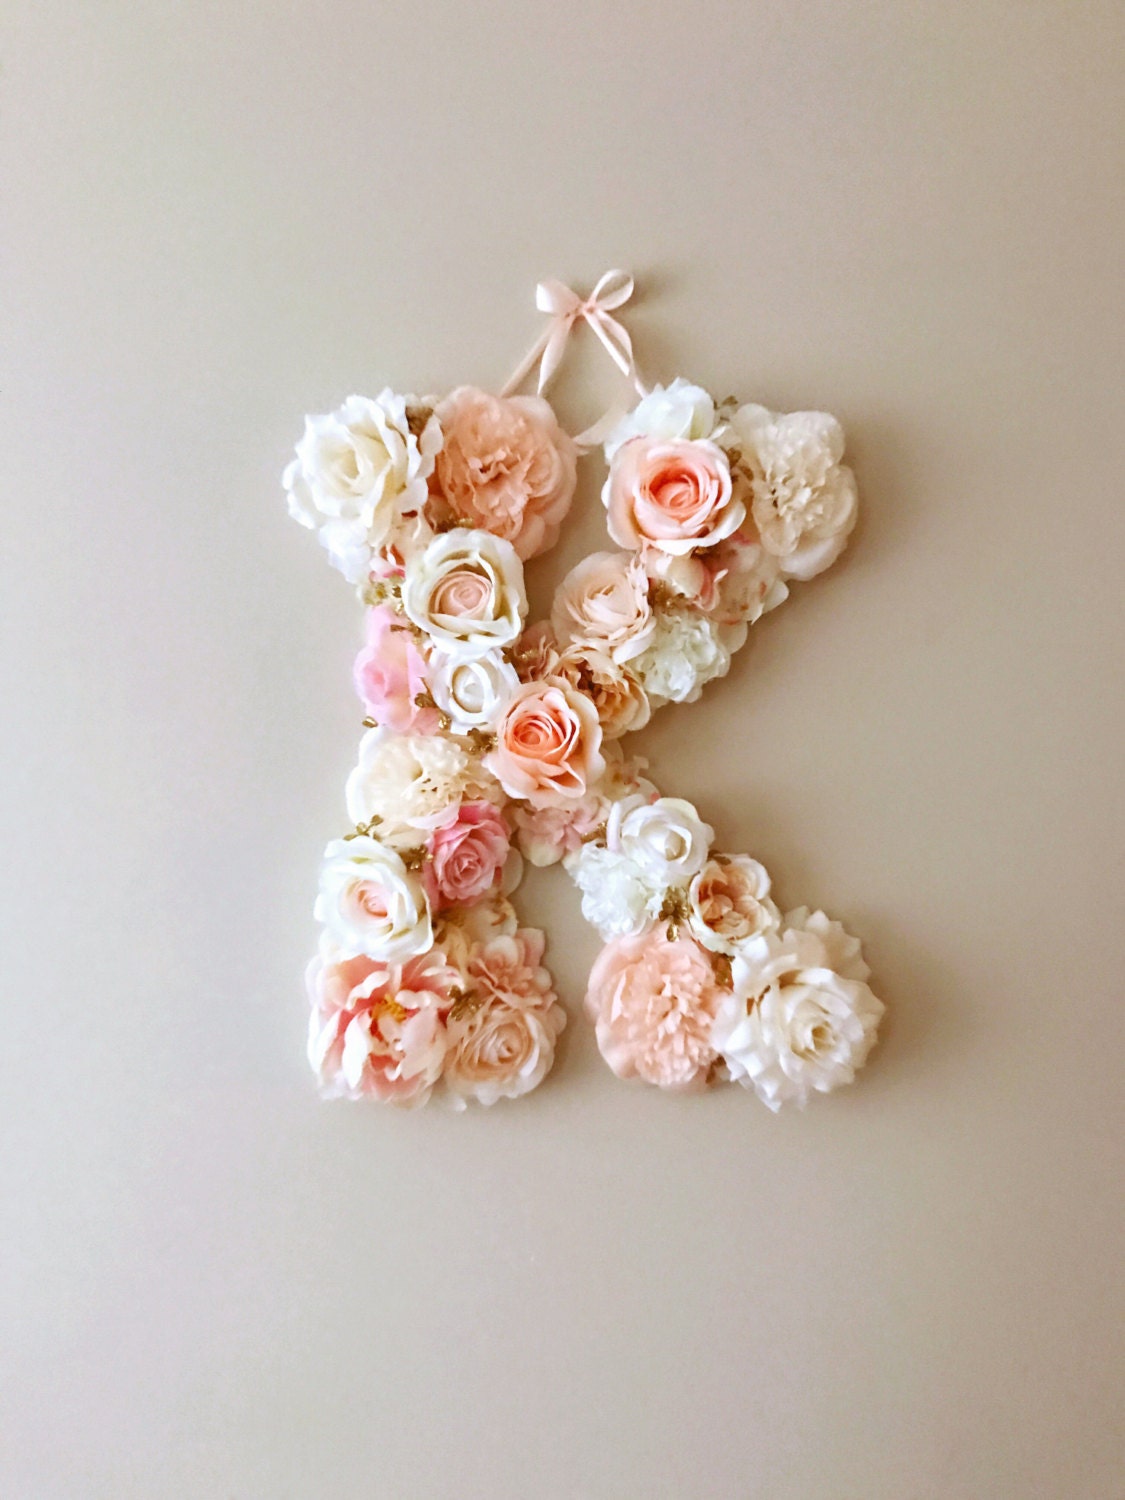 Flower Letters, 18'' Floral Letters, Vintage wedding decor / Personalized nursery decor, Baby shower gift, Photography Prop, Wall art